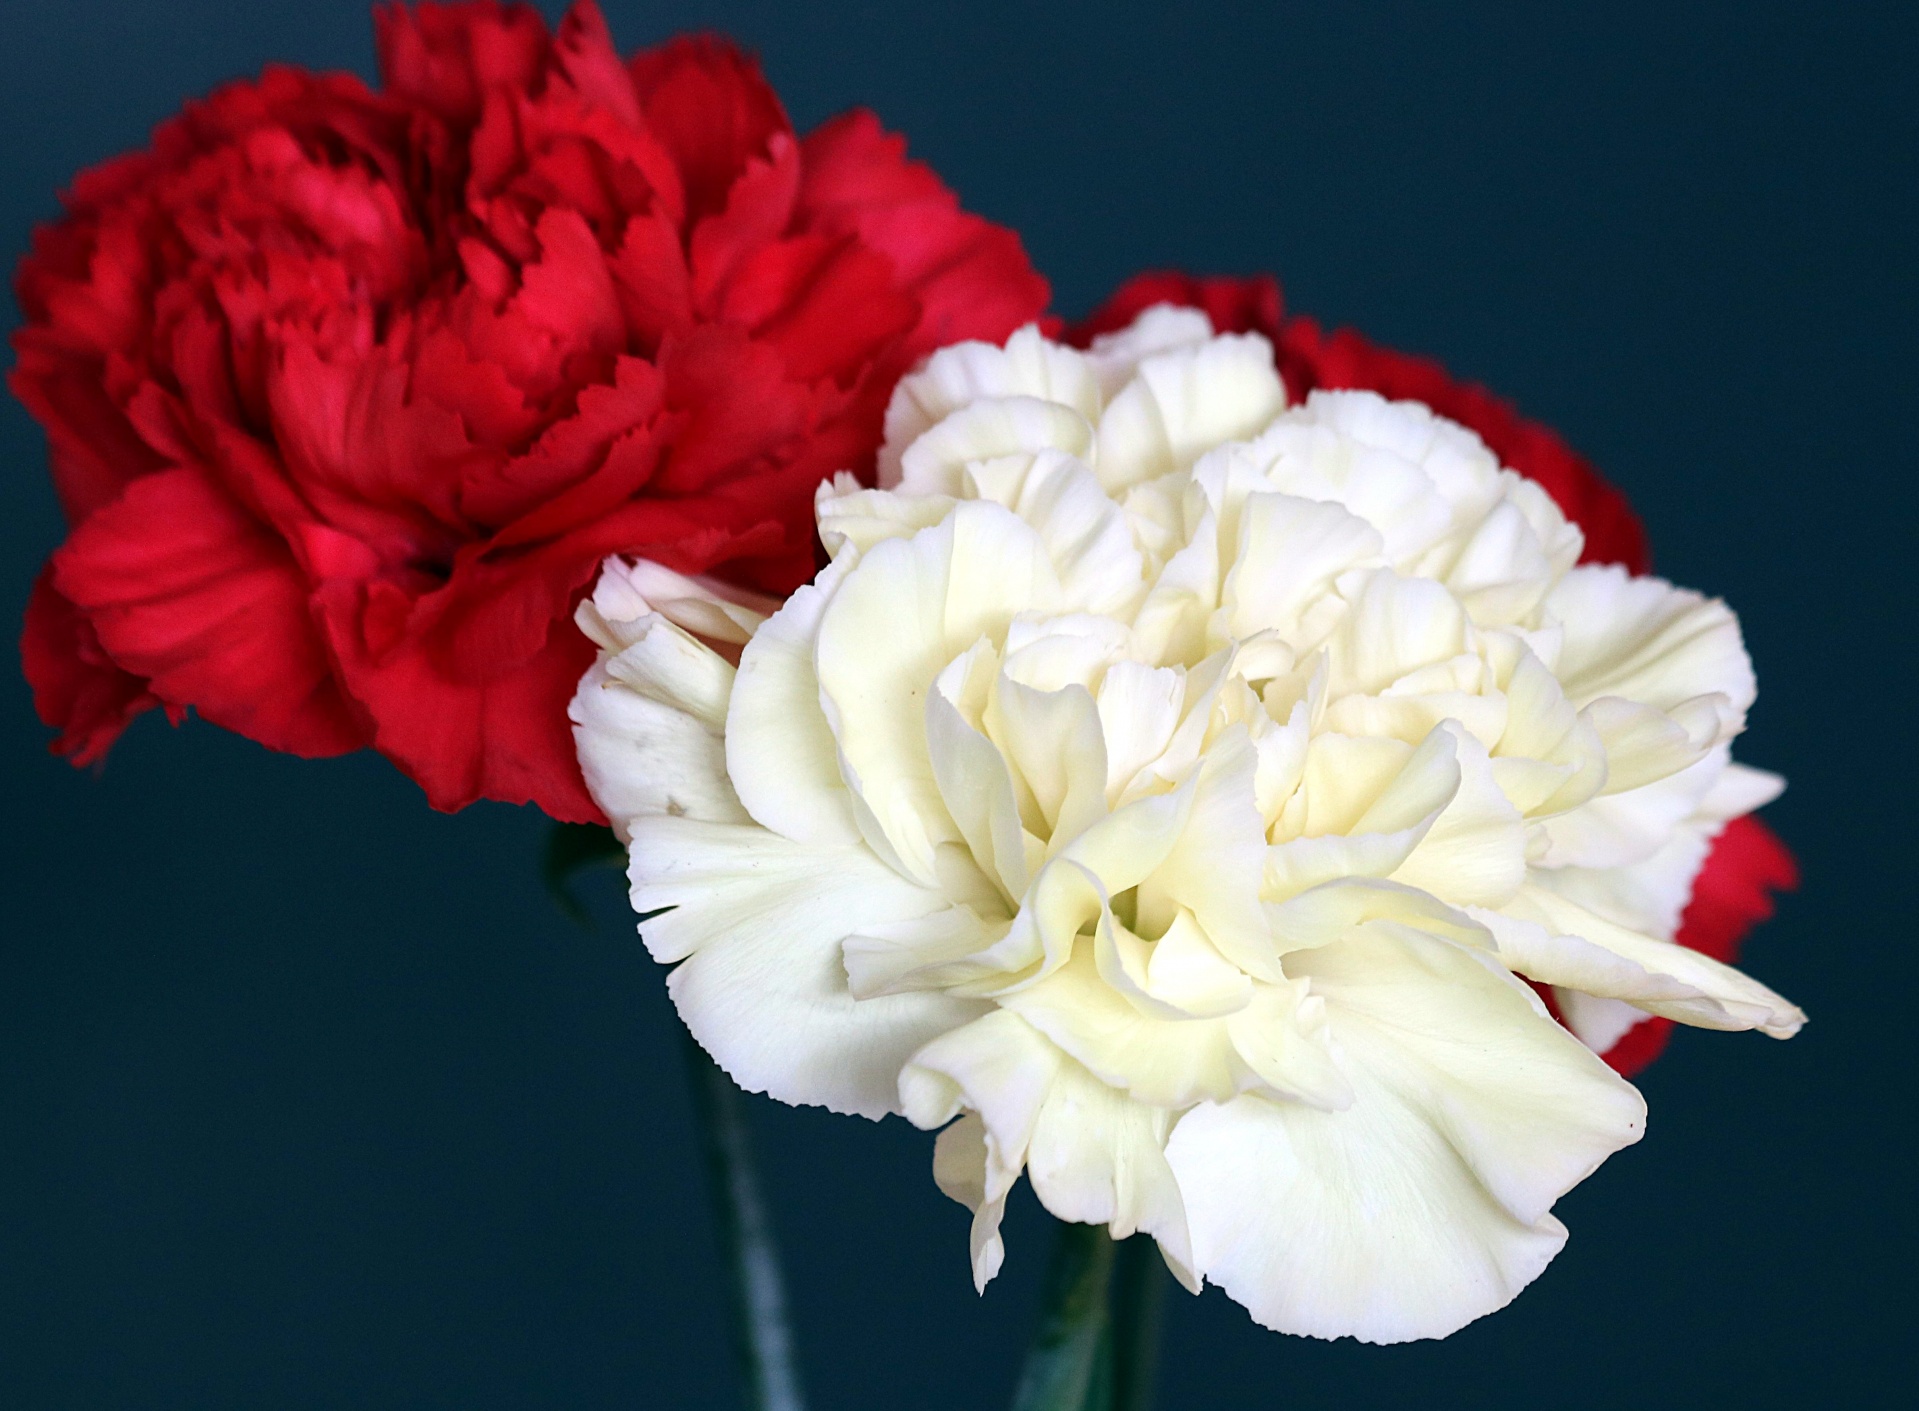 Close-up of a beautiful white carnation flower with a red carnation behind it, on a blue background.